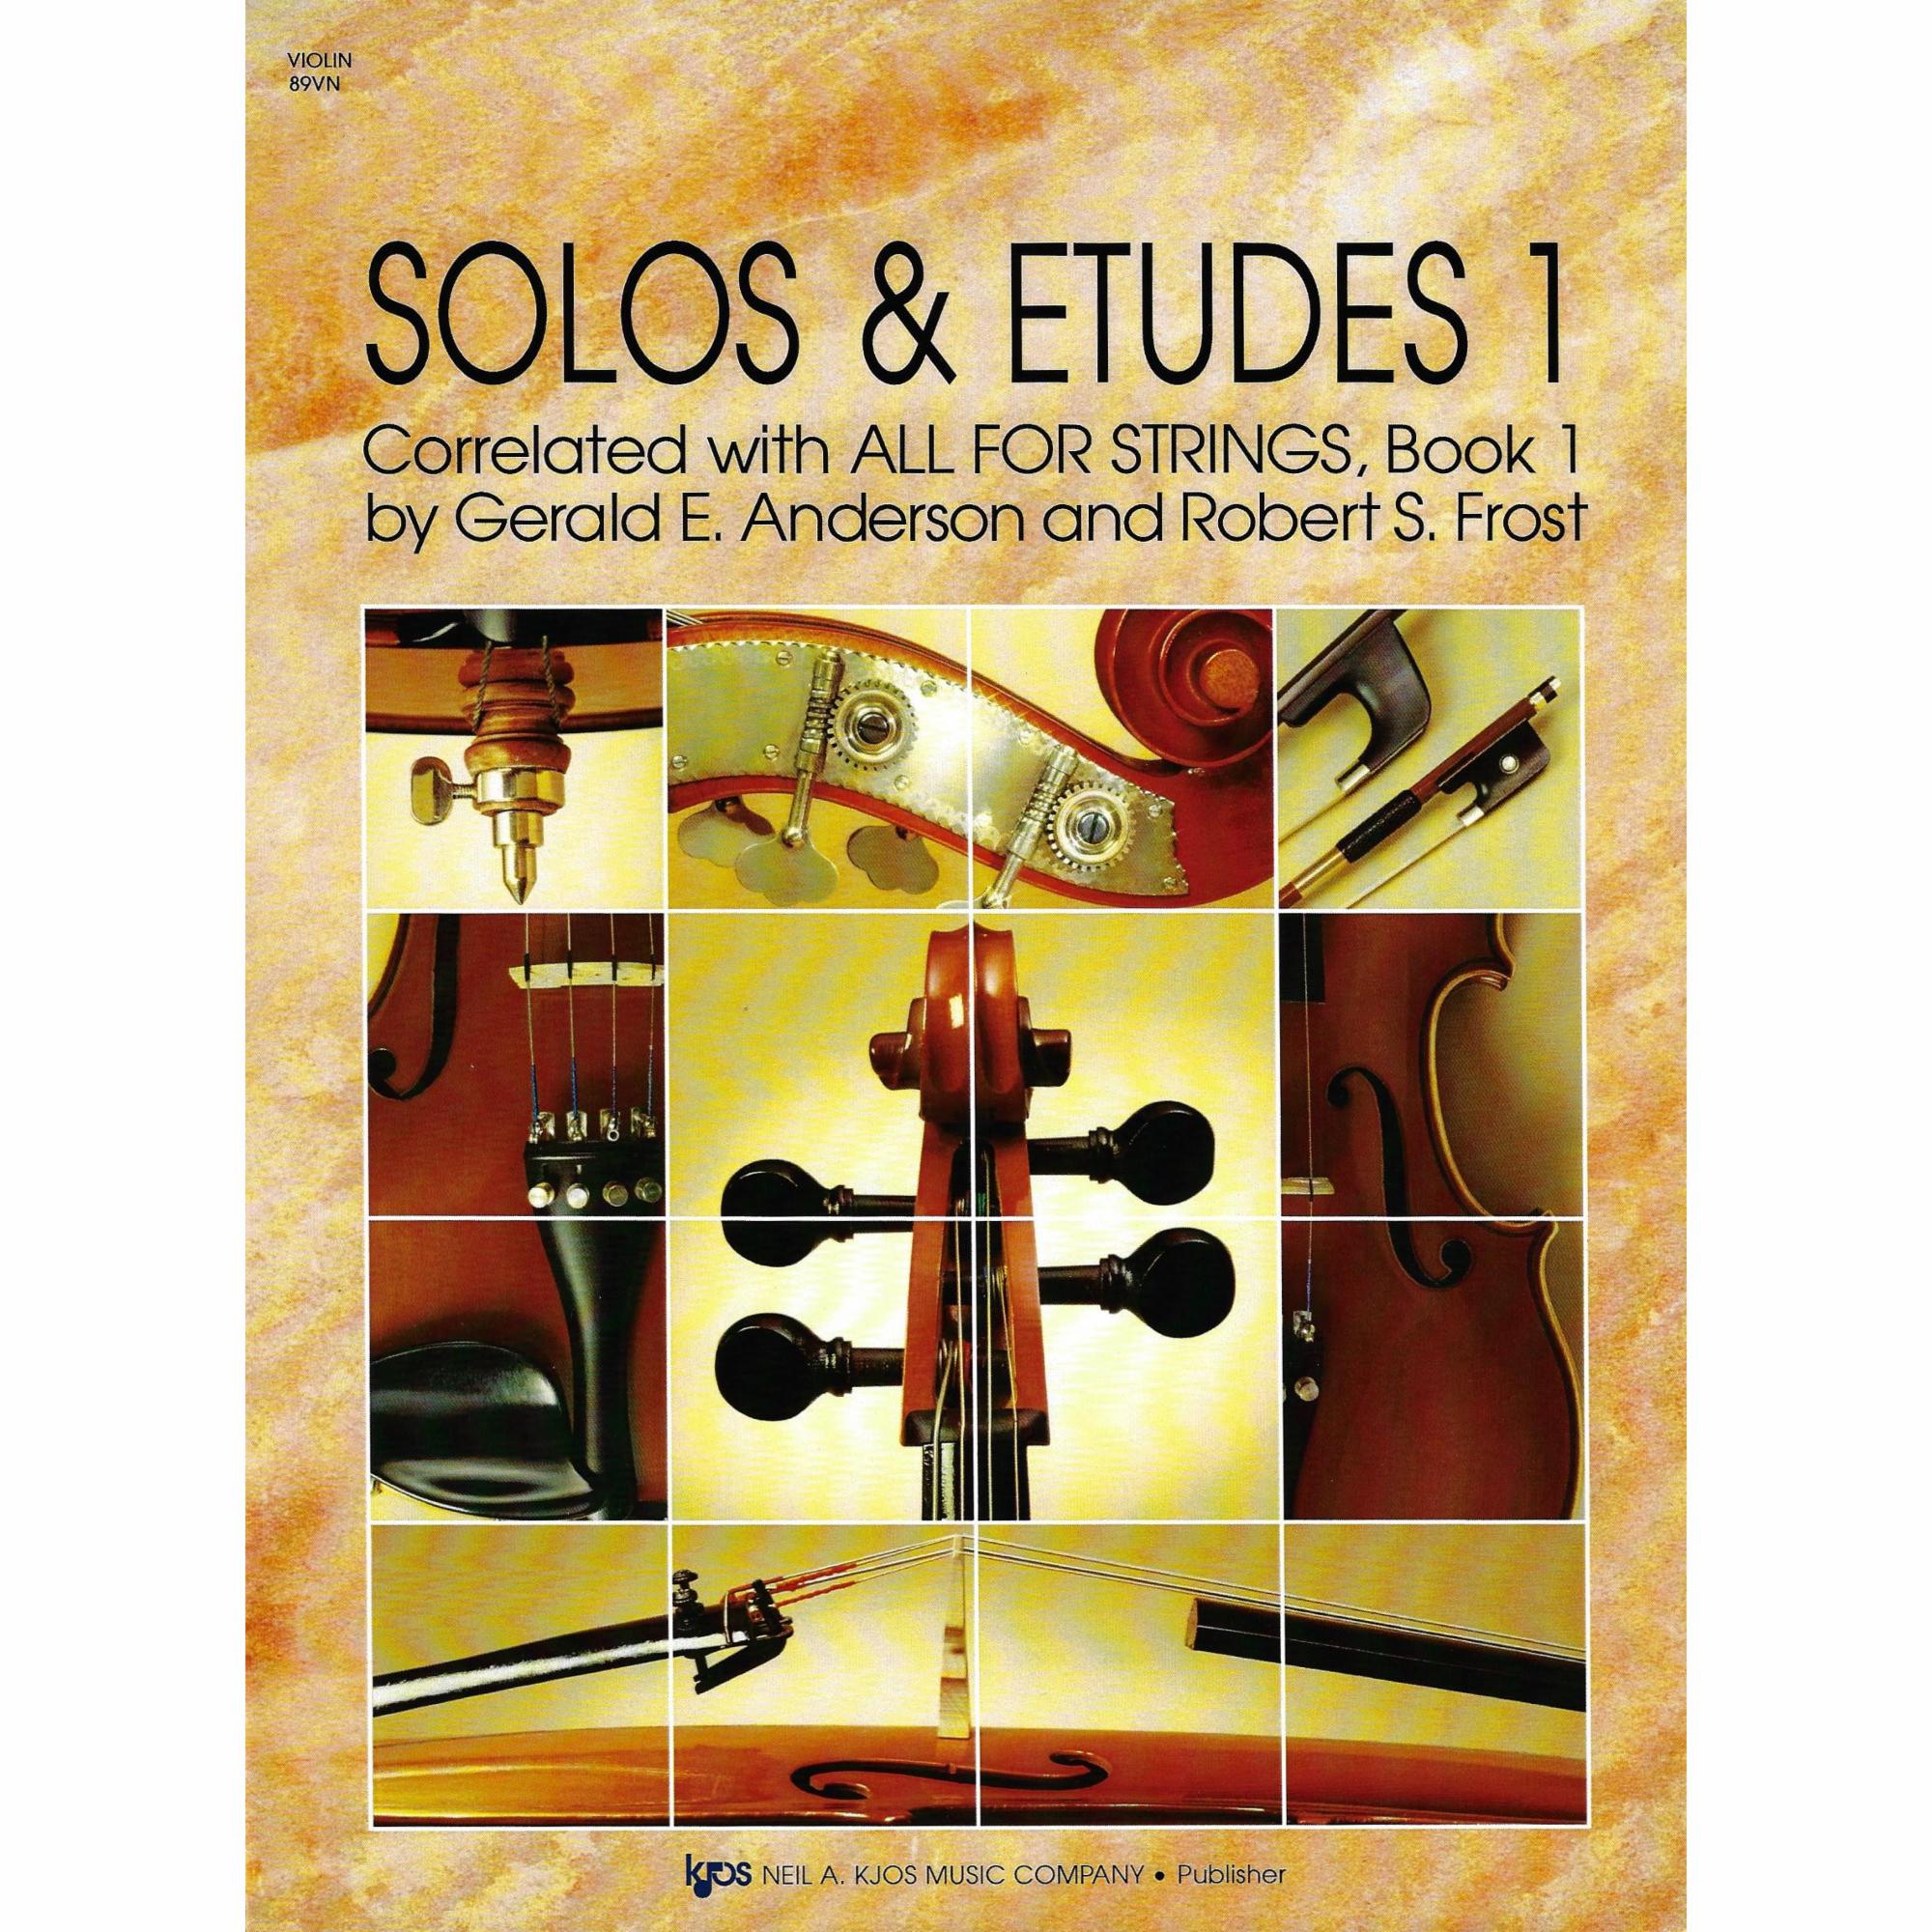 All for Strings: Solos & Etudes, Book 1